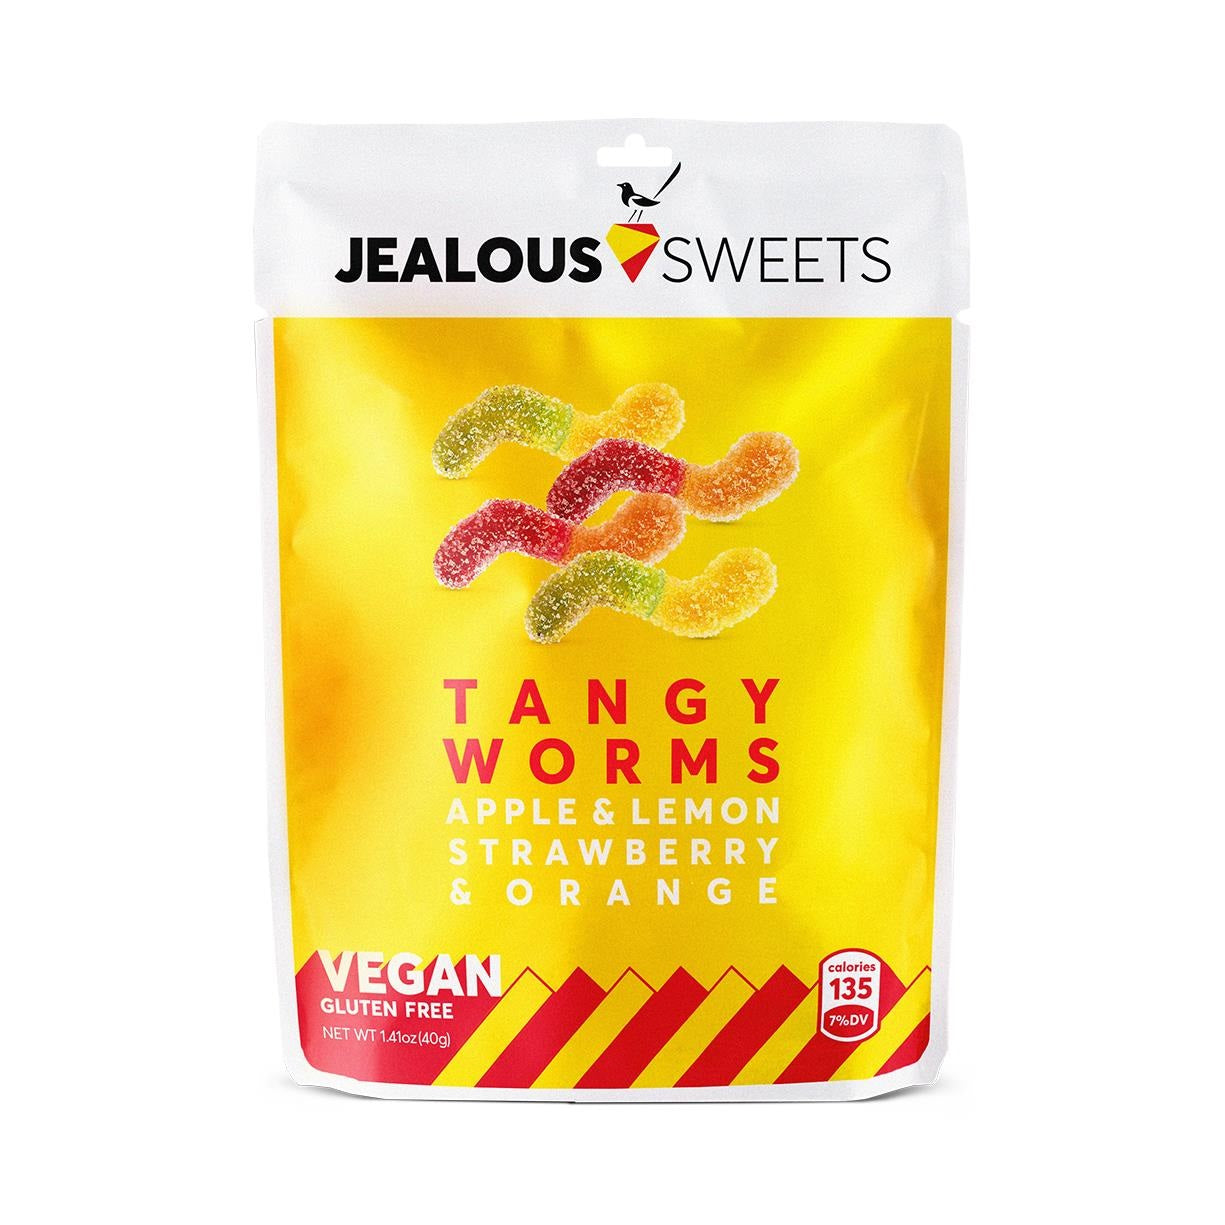 JEALOUS SWEETS - TANGY WORMS BAG 40G